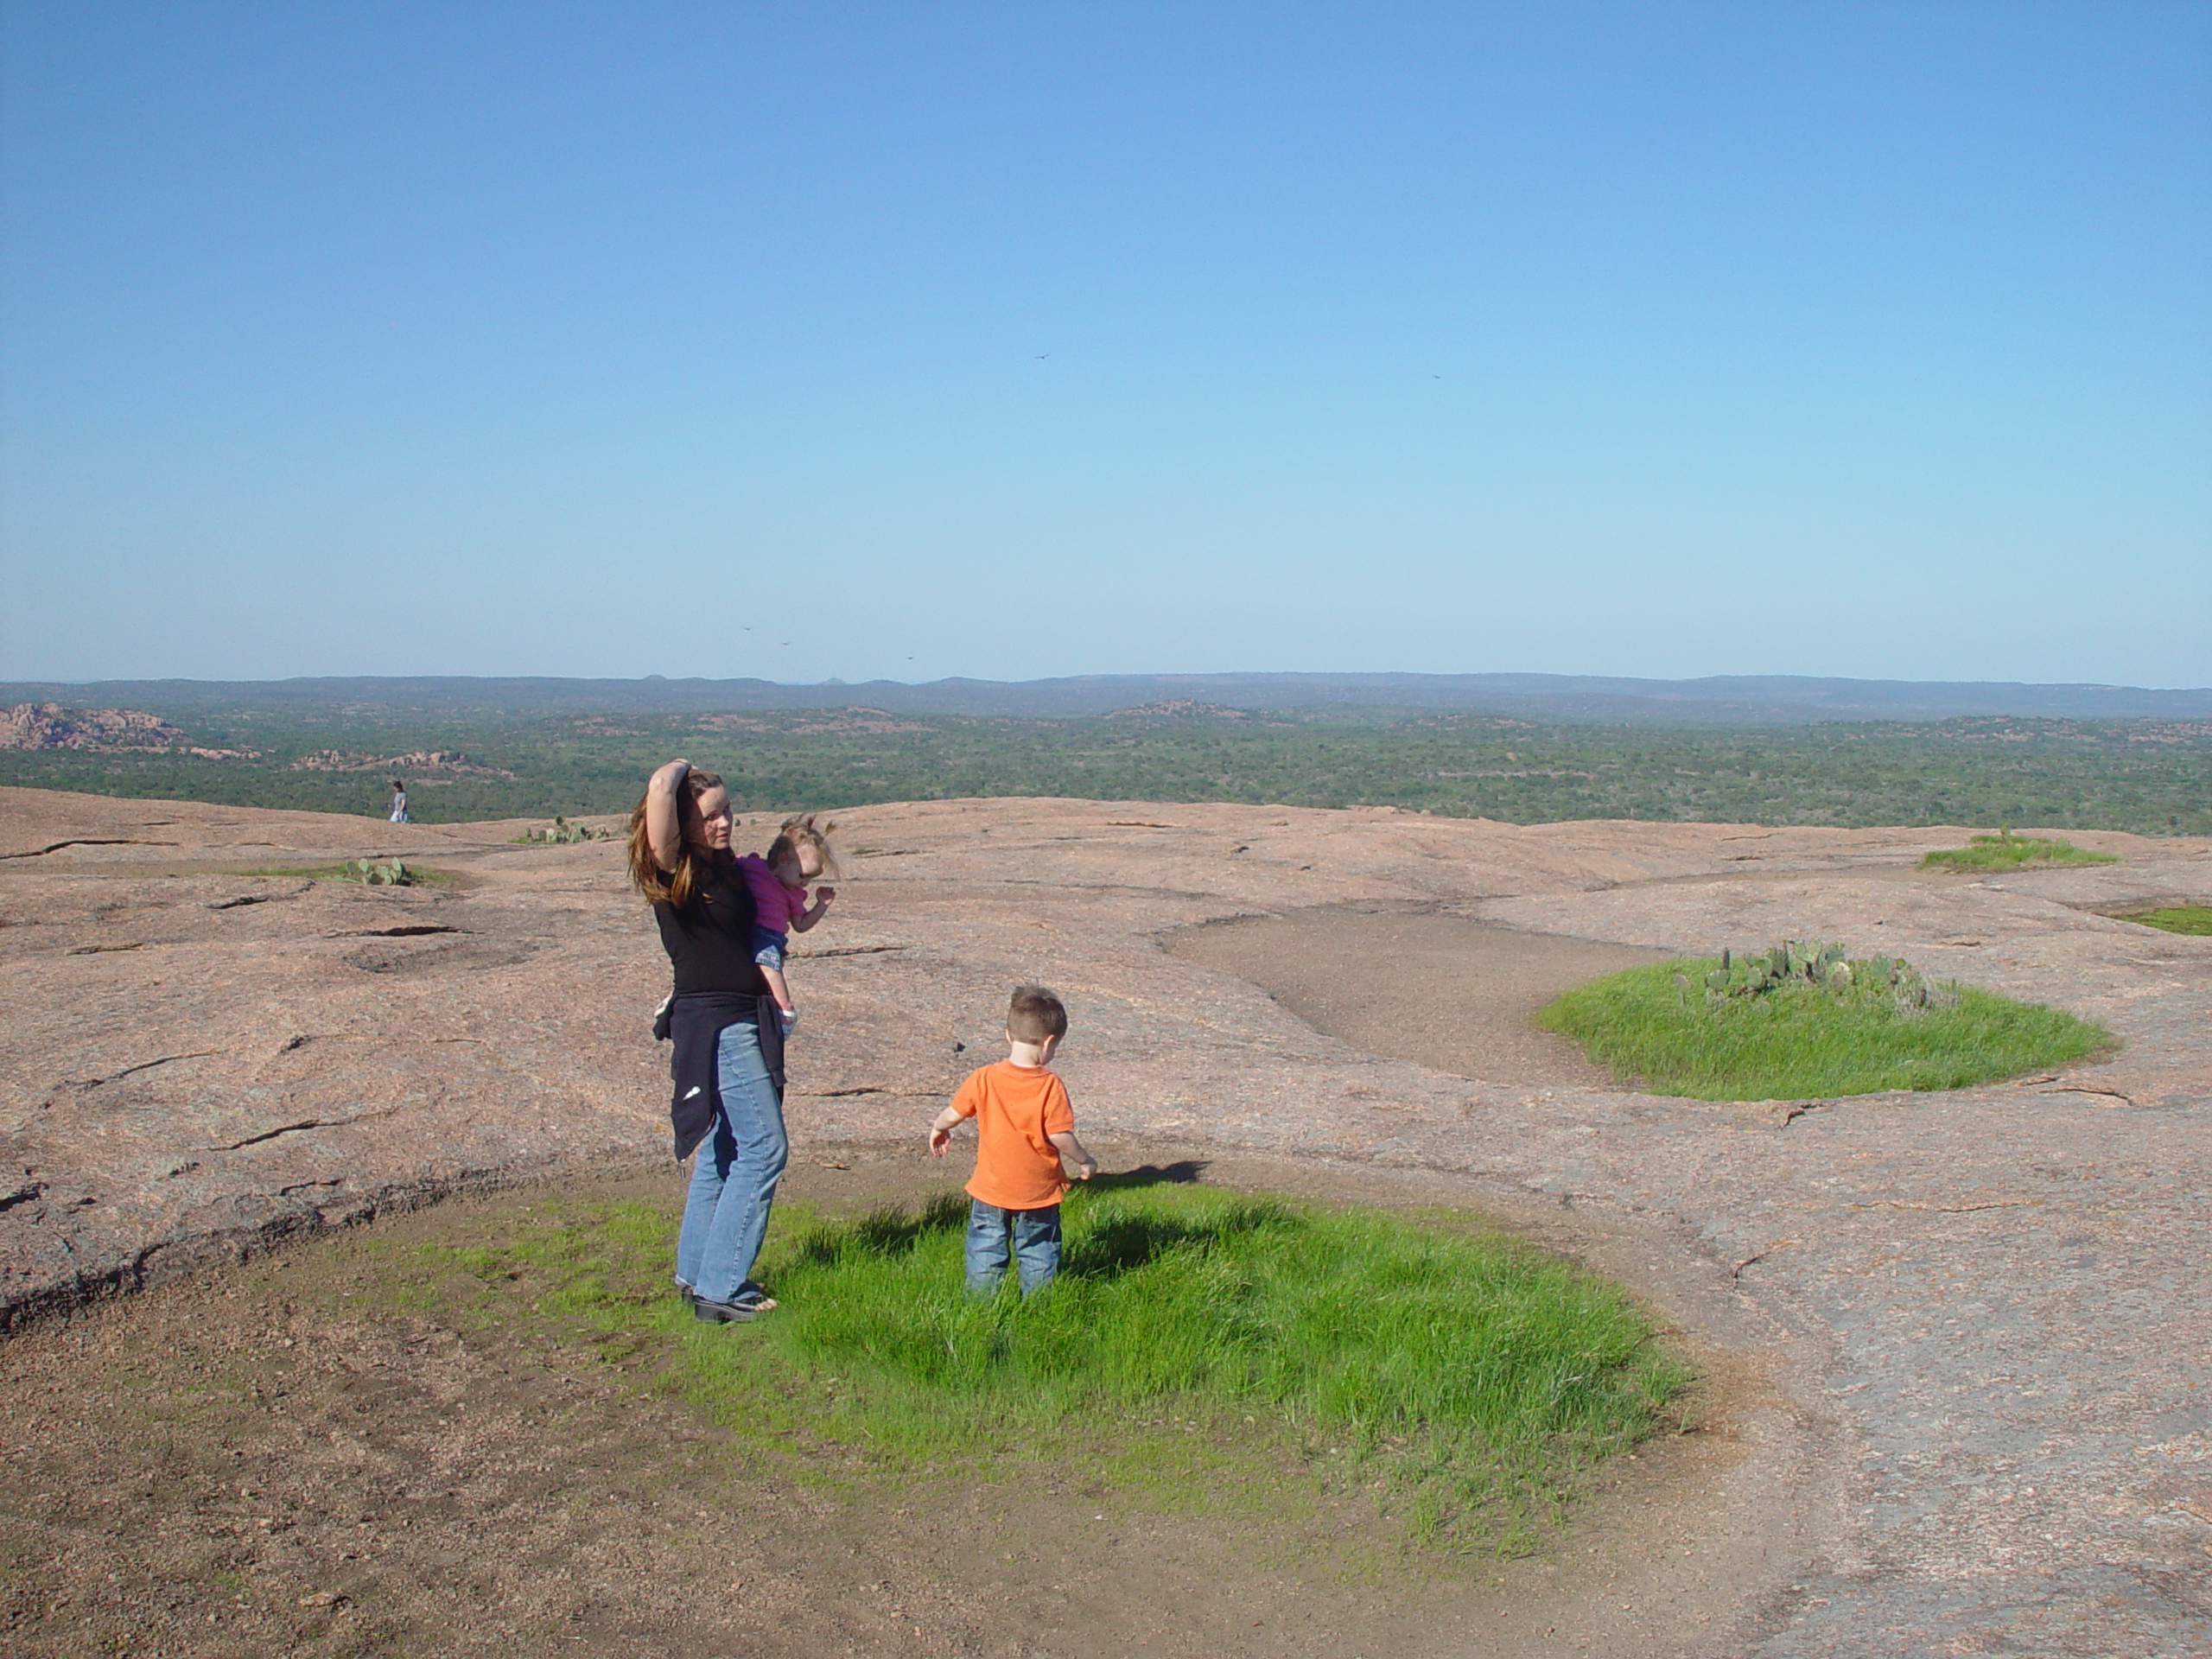 Bluebonnets, Climbing Enchanted Rock, Cooper's Old Time Pit Bar-B-Que (Home of the Big Chop)